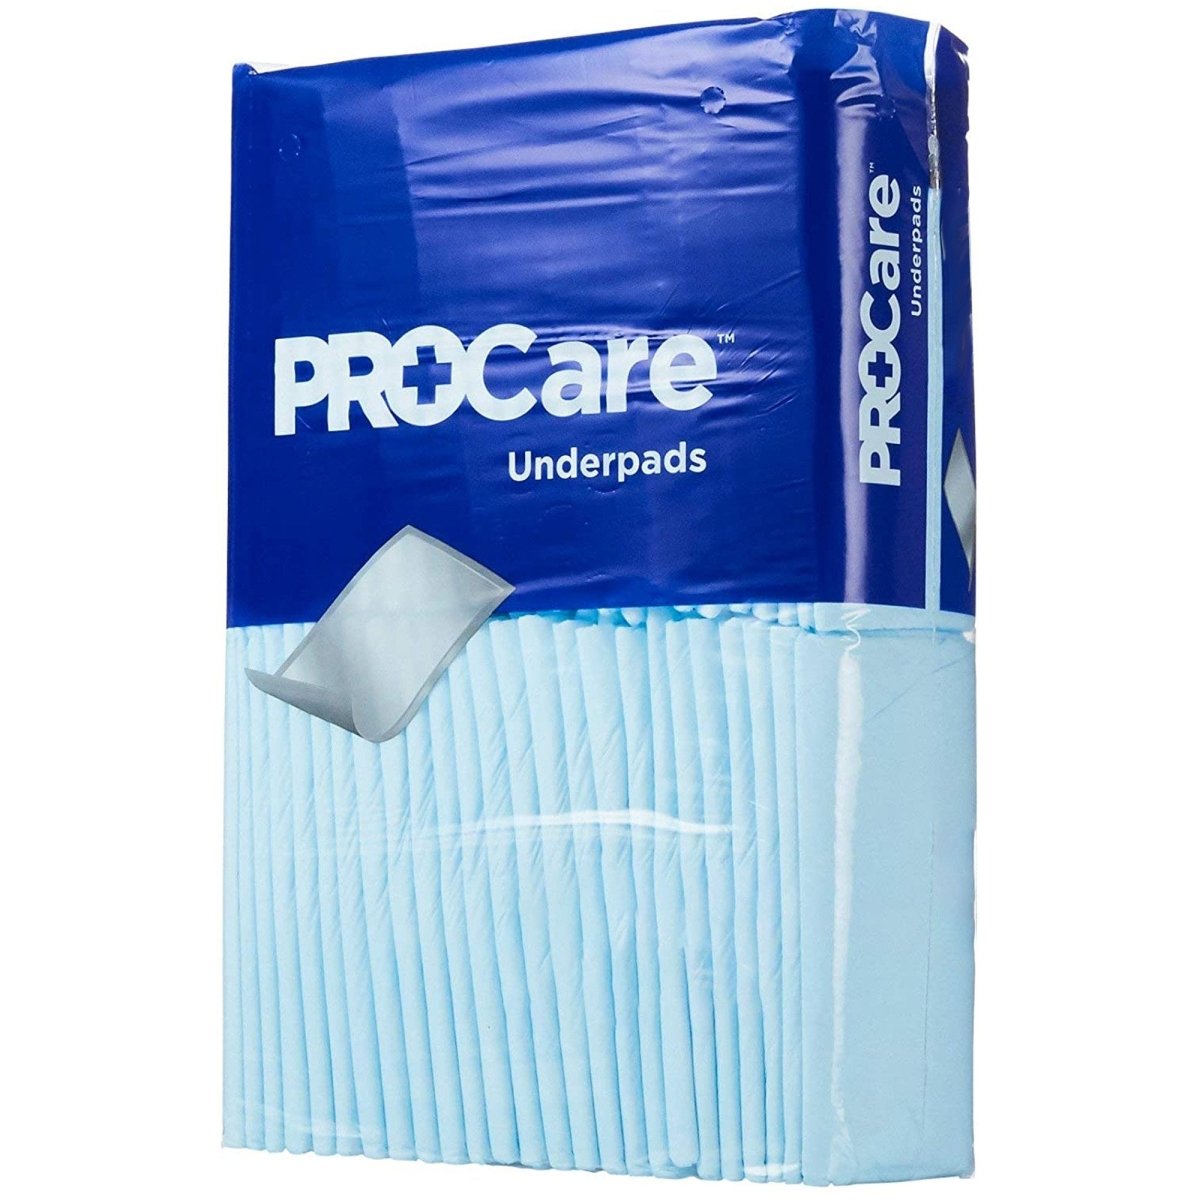 First Quality ProCare Incontinence Underpads, Moisture-Proof, Light Absorbency, Comfortable, Blue - 930058_BG - 1